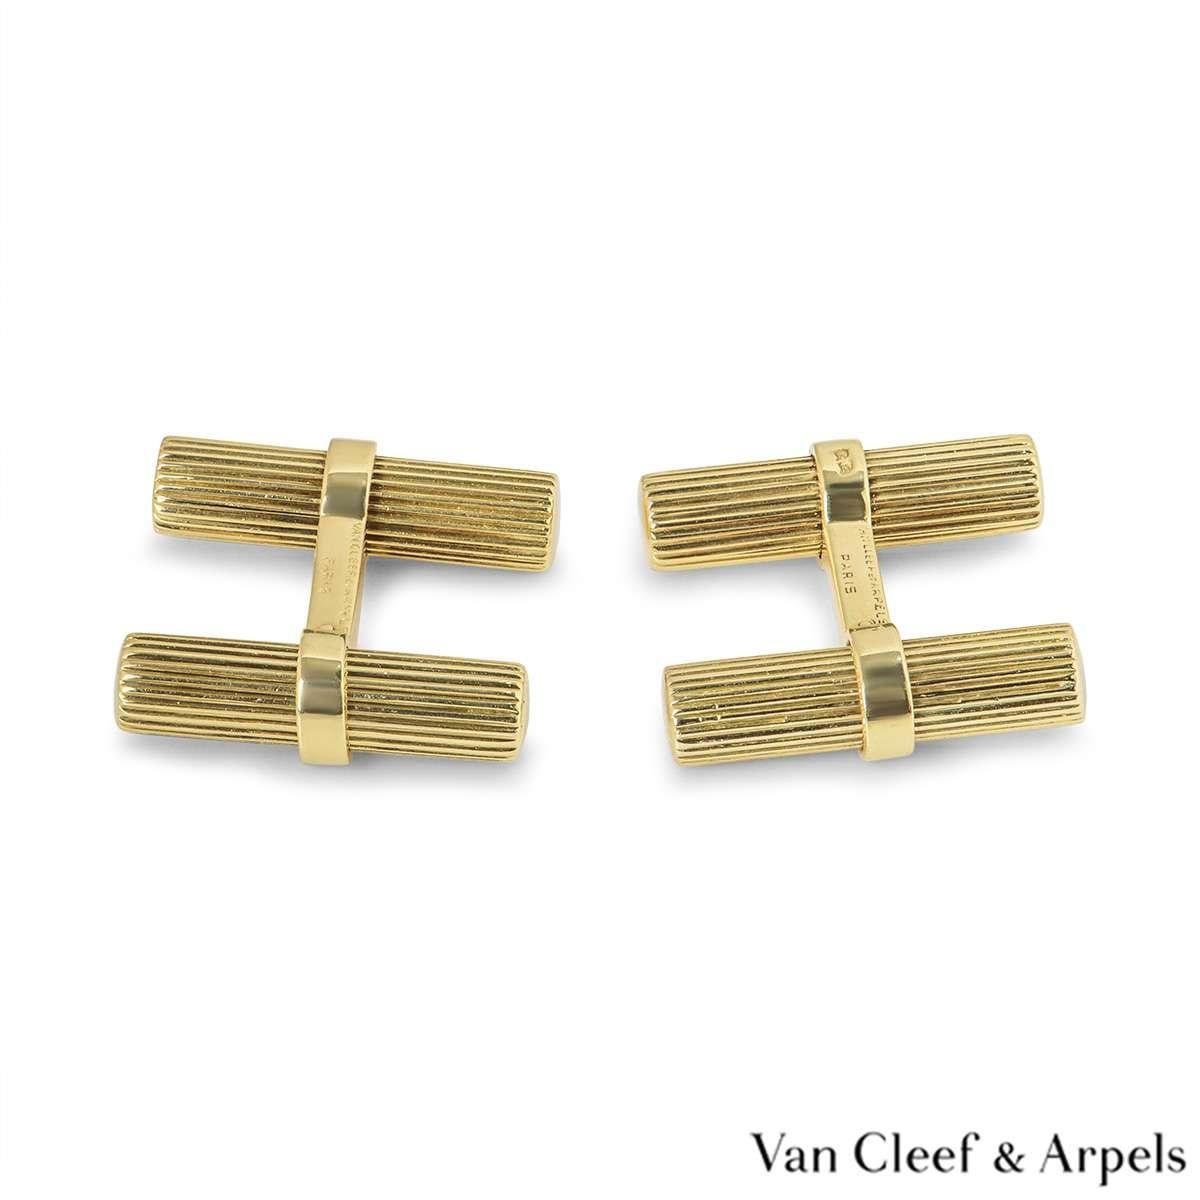 A pair of 18k yellow gold cufflinks by Van Cleef & Arpels. The cufflinks feature 4 removable barrels connected by a smooth polished yellow gold bar. The cufflinks measure 2cm in width and have a gross weight of 13.3 grams.

The cufflinks come